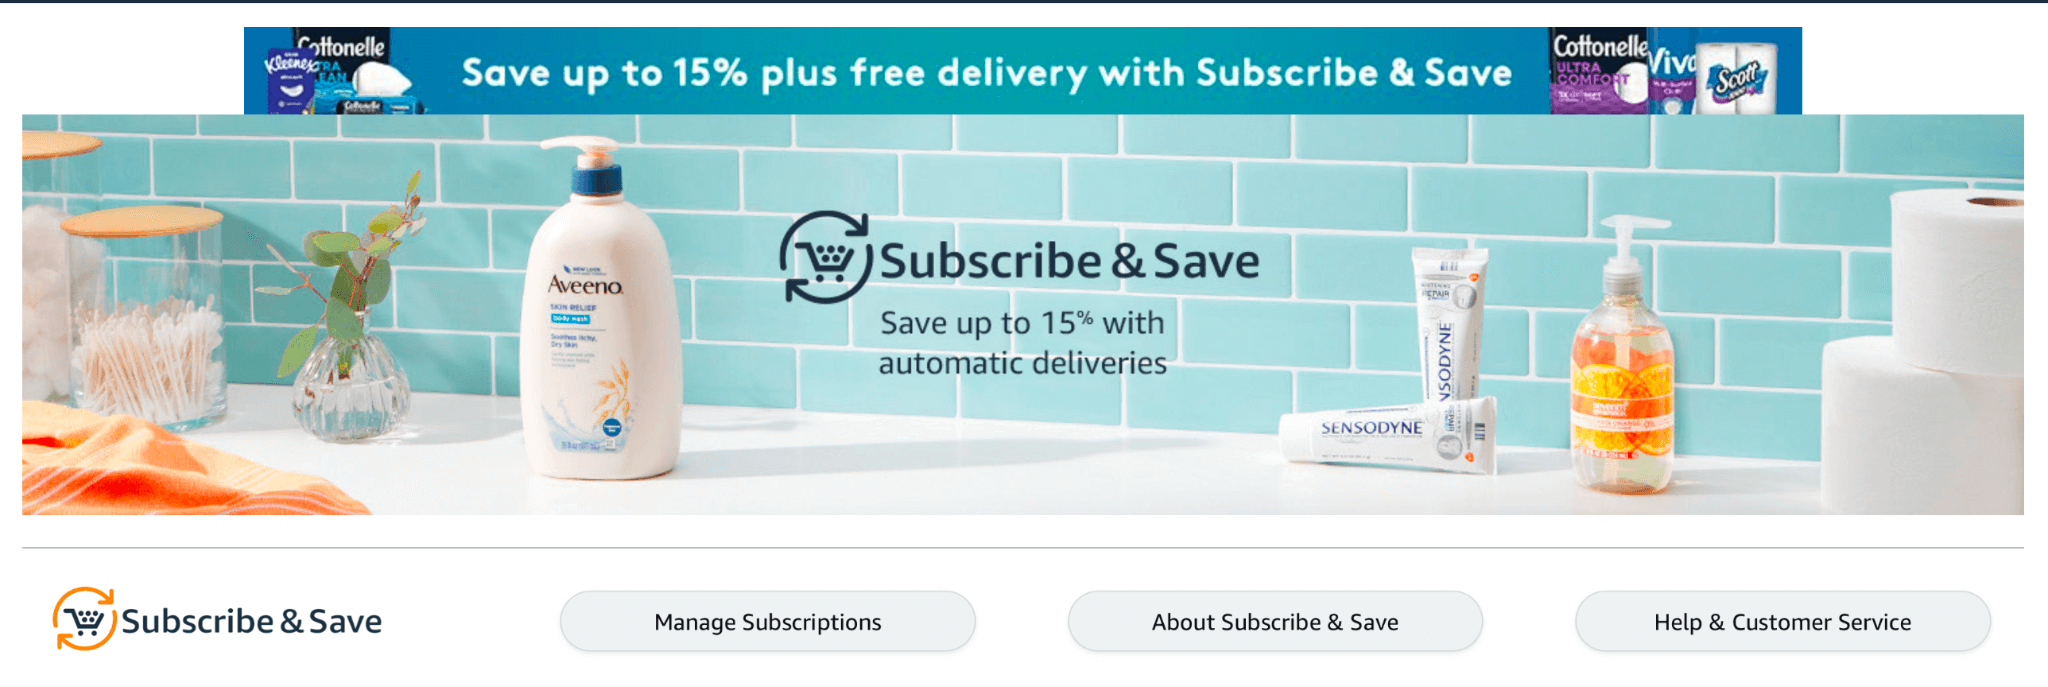 Offer a subscribe and save option